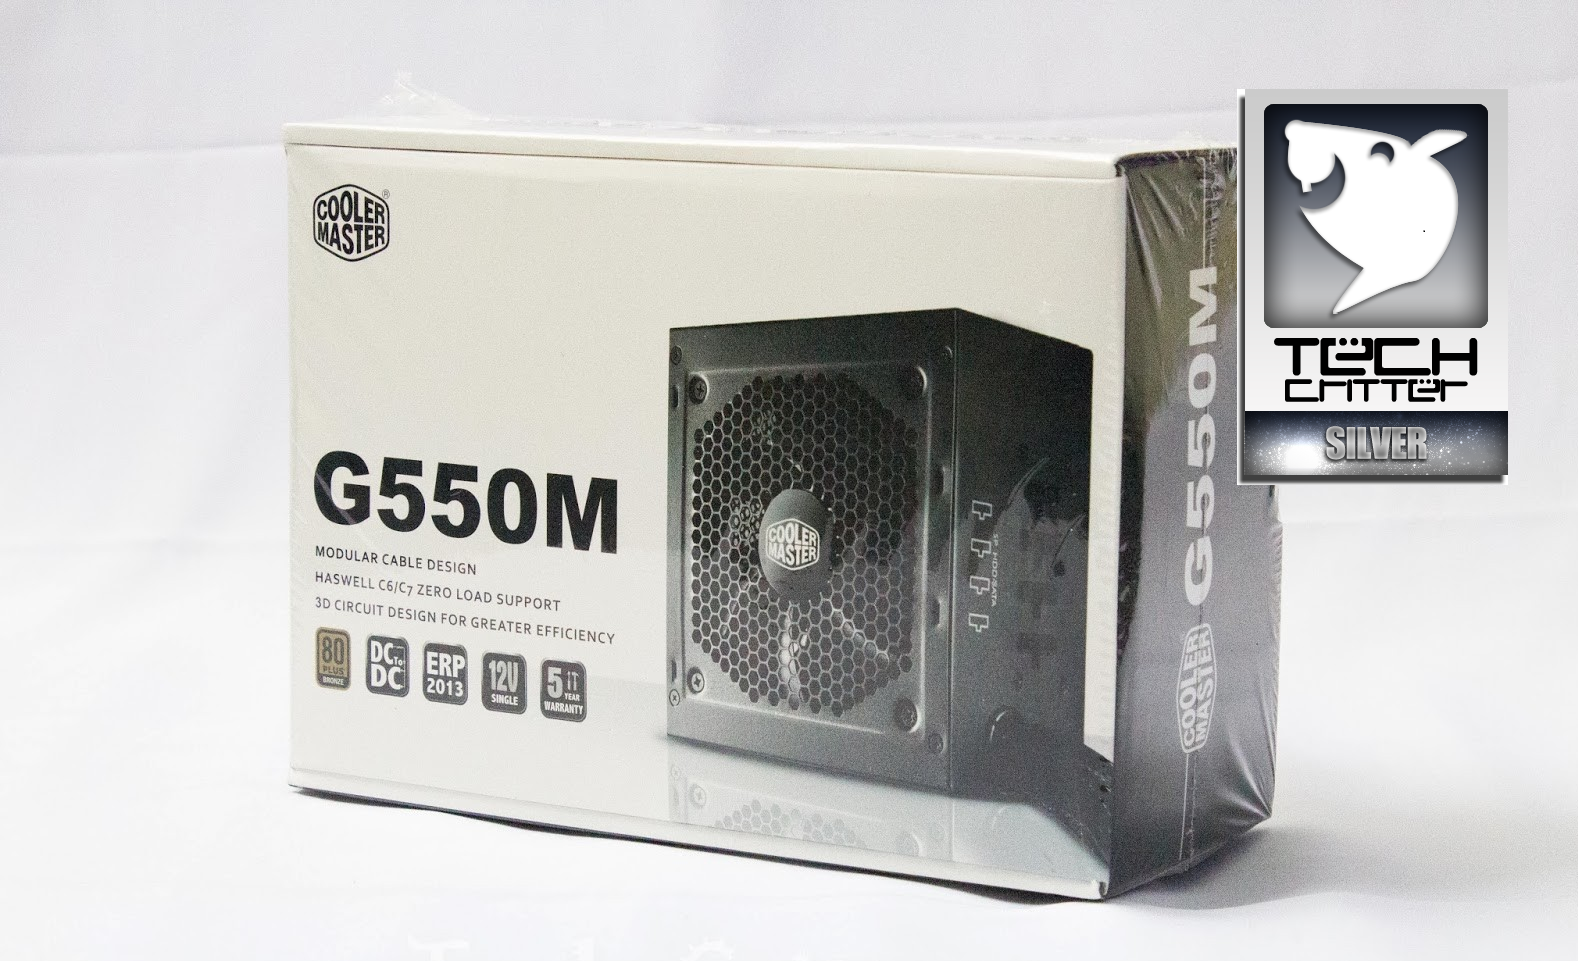 Cooler Master G550M Power Supply Unit Unboxing and Overview 22